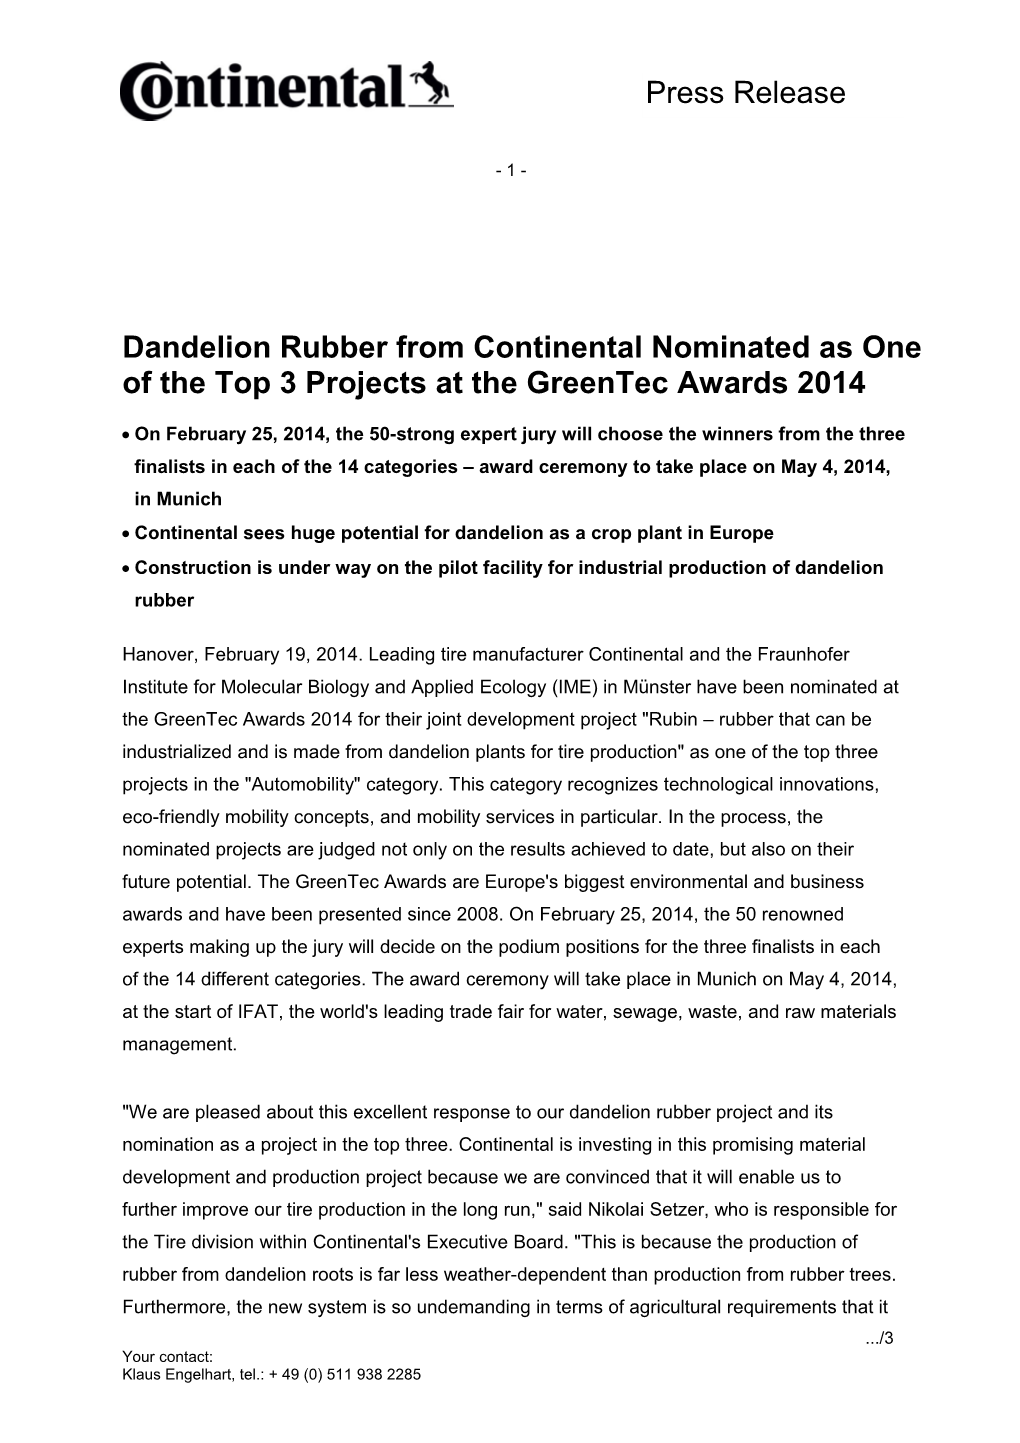 Dandelion Rubber from Continental Nominated As One of the Top 3 Projects at the Greentec